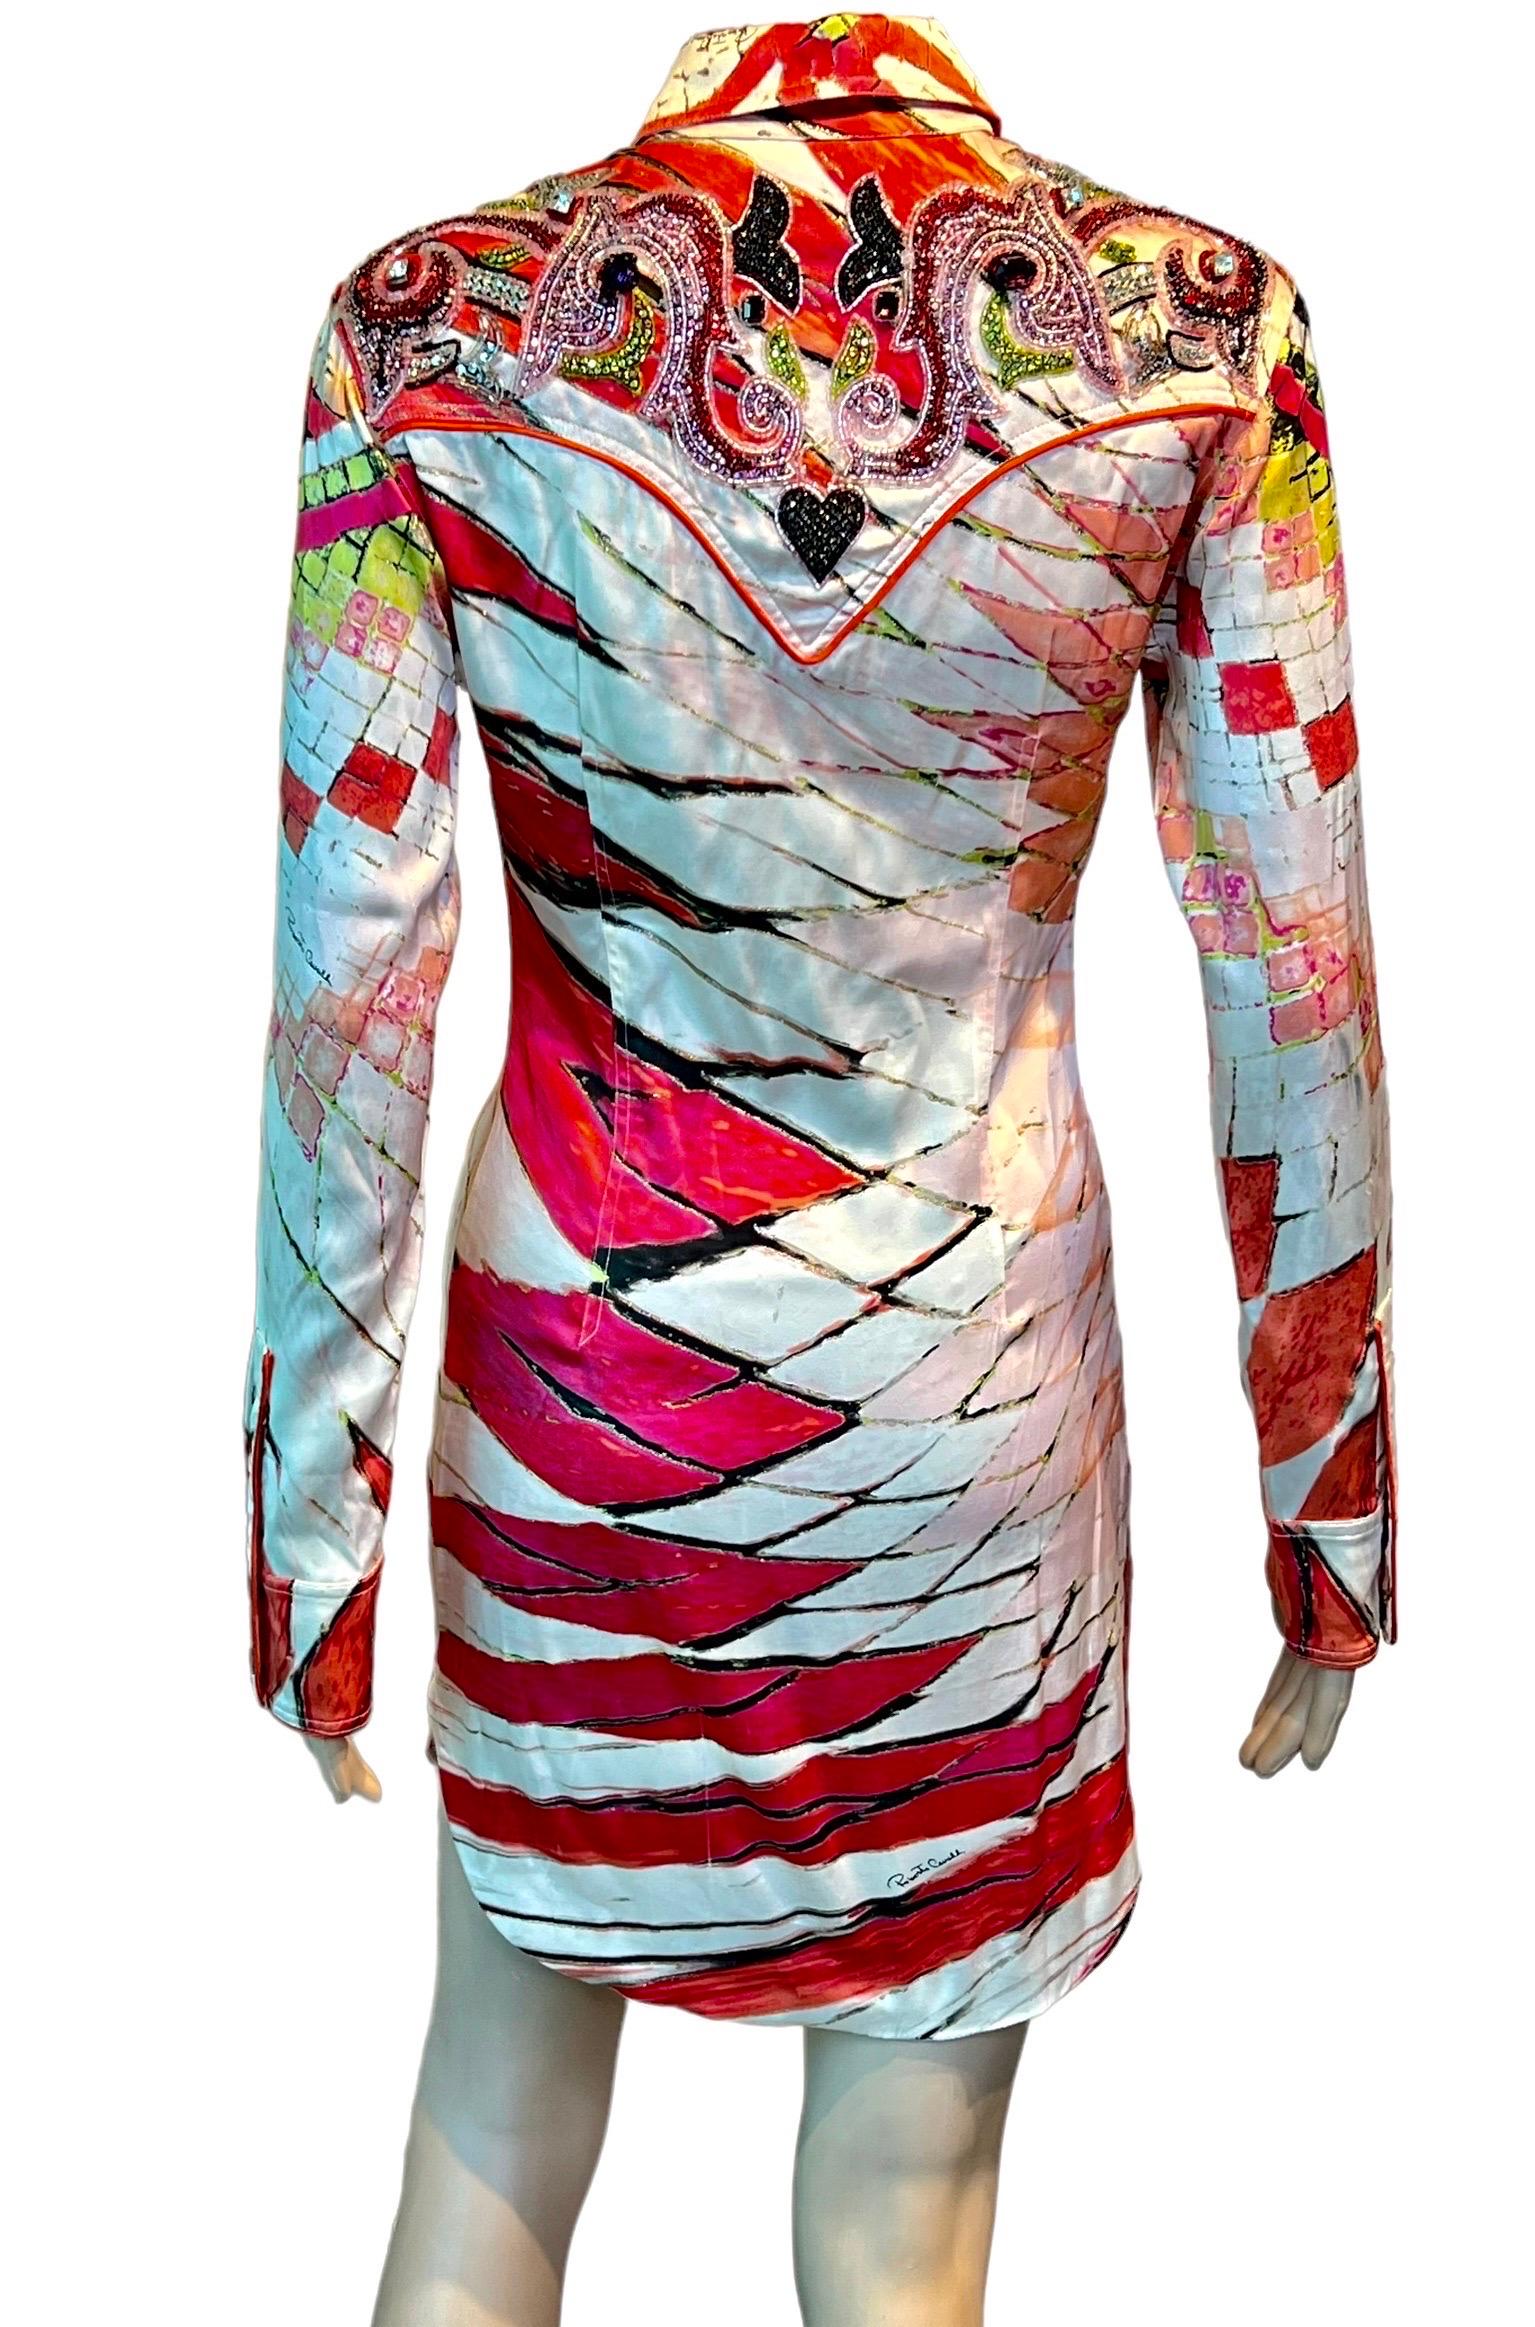 Women's Roberto Cavalli S/S 2004 Runway Embellished Plunging Button Up Mini Shirt Dress For Sale